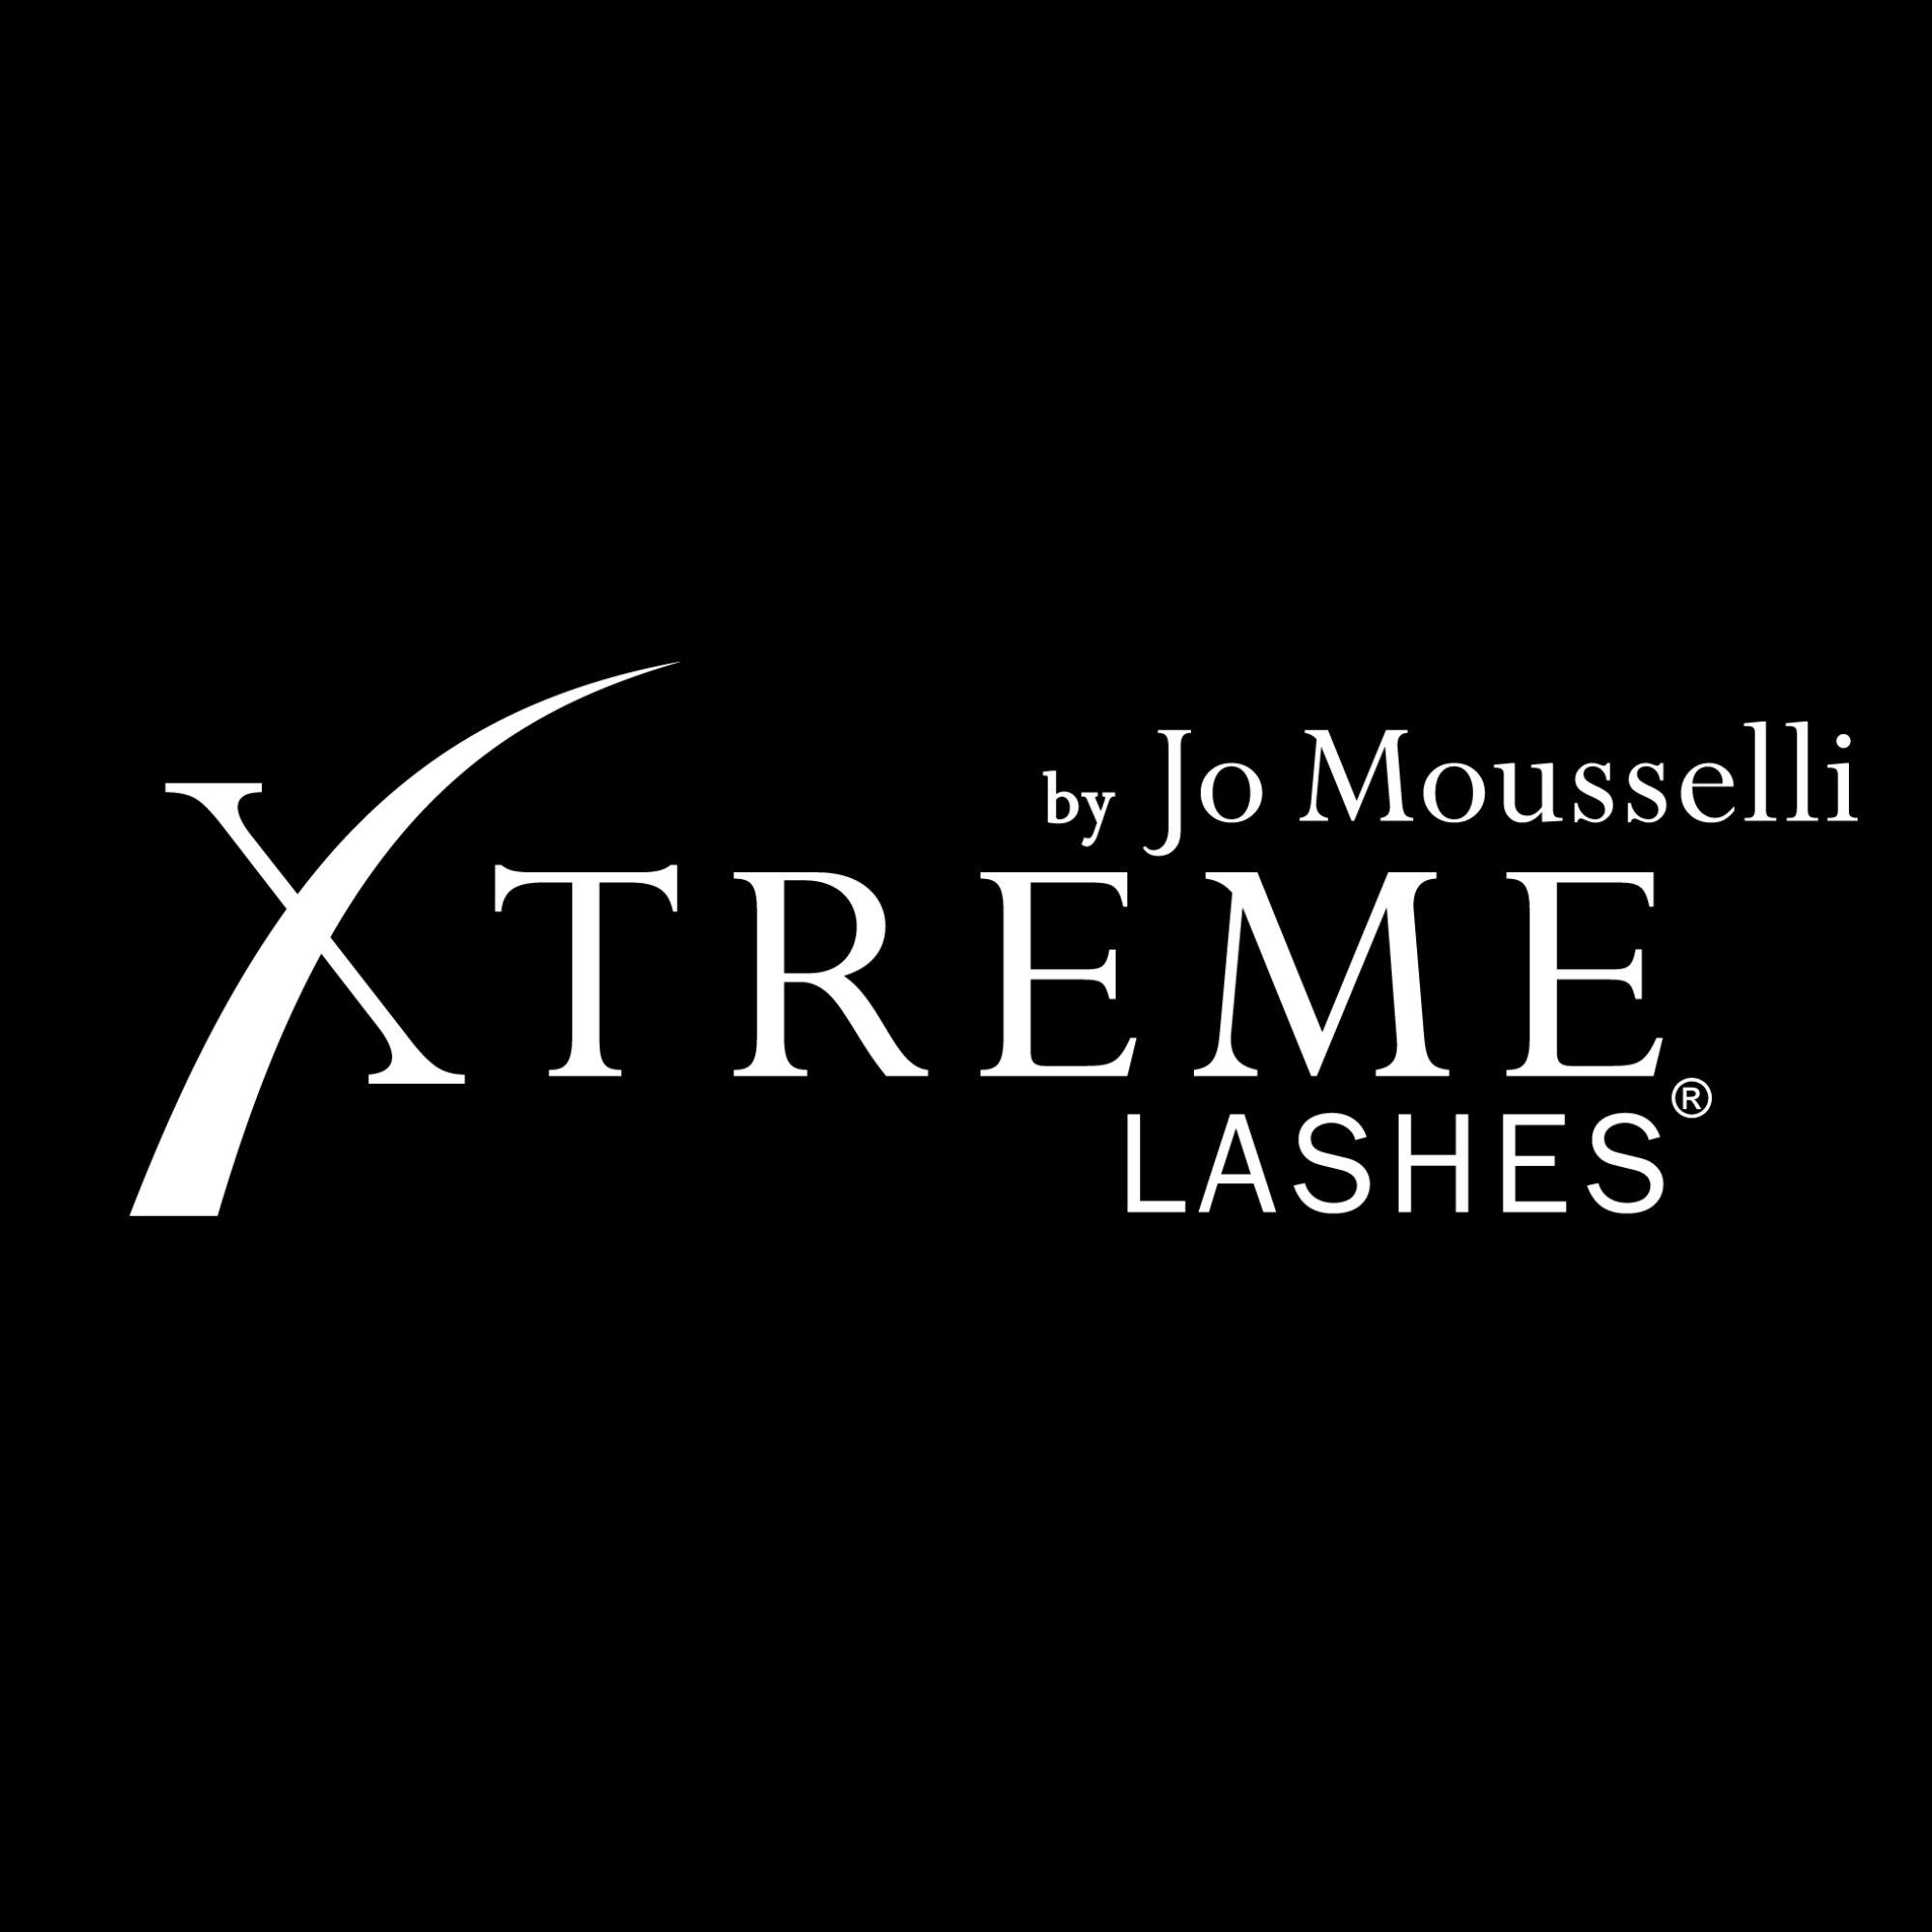 Company logo of Xtreme Lashes by Jo Mousselli